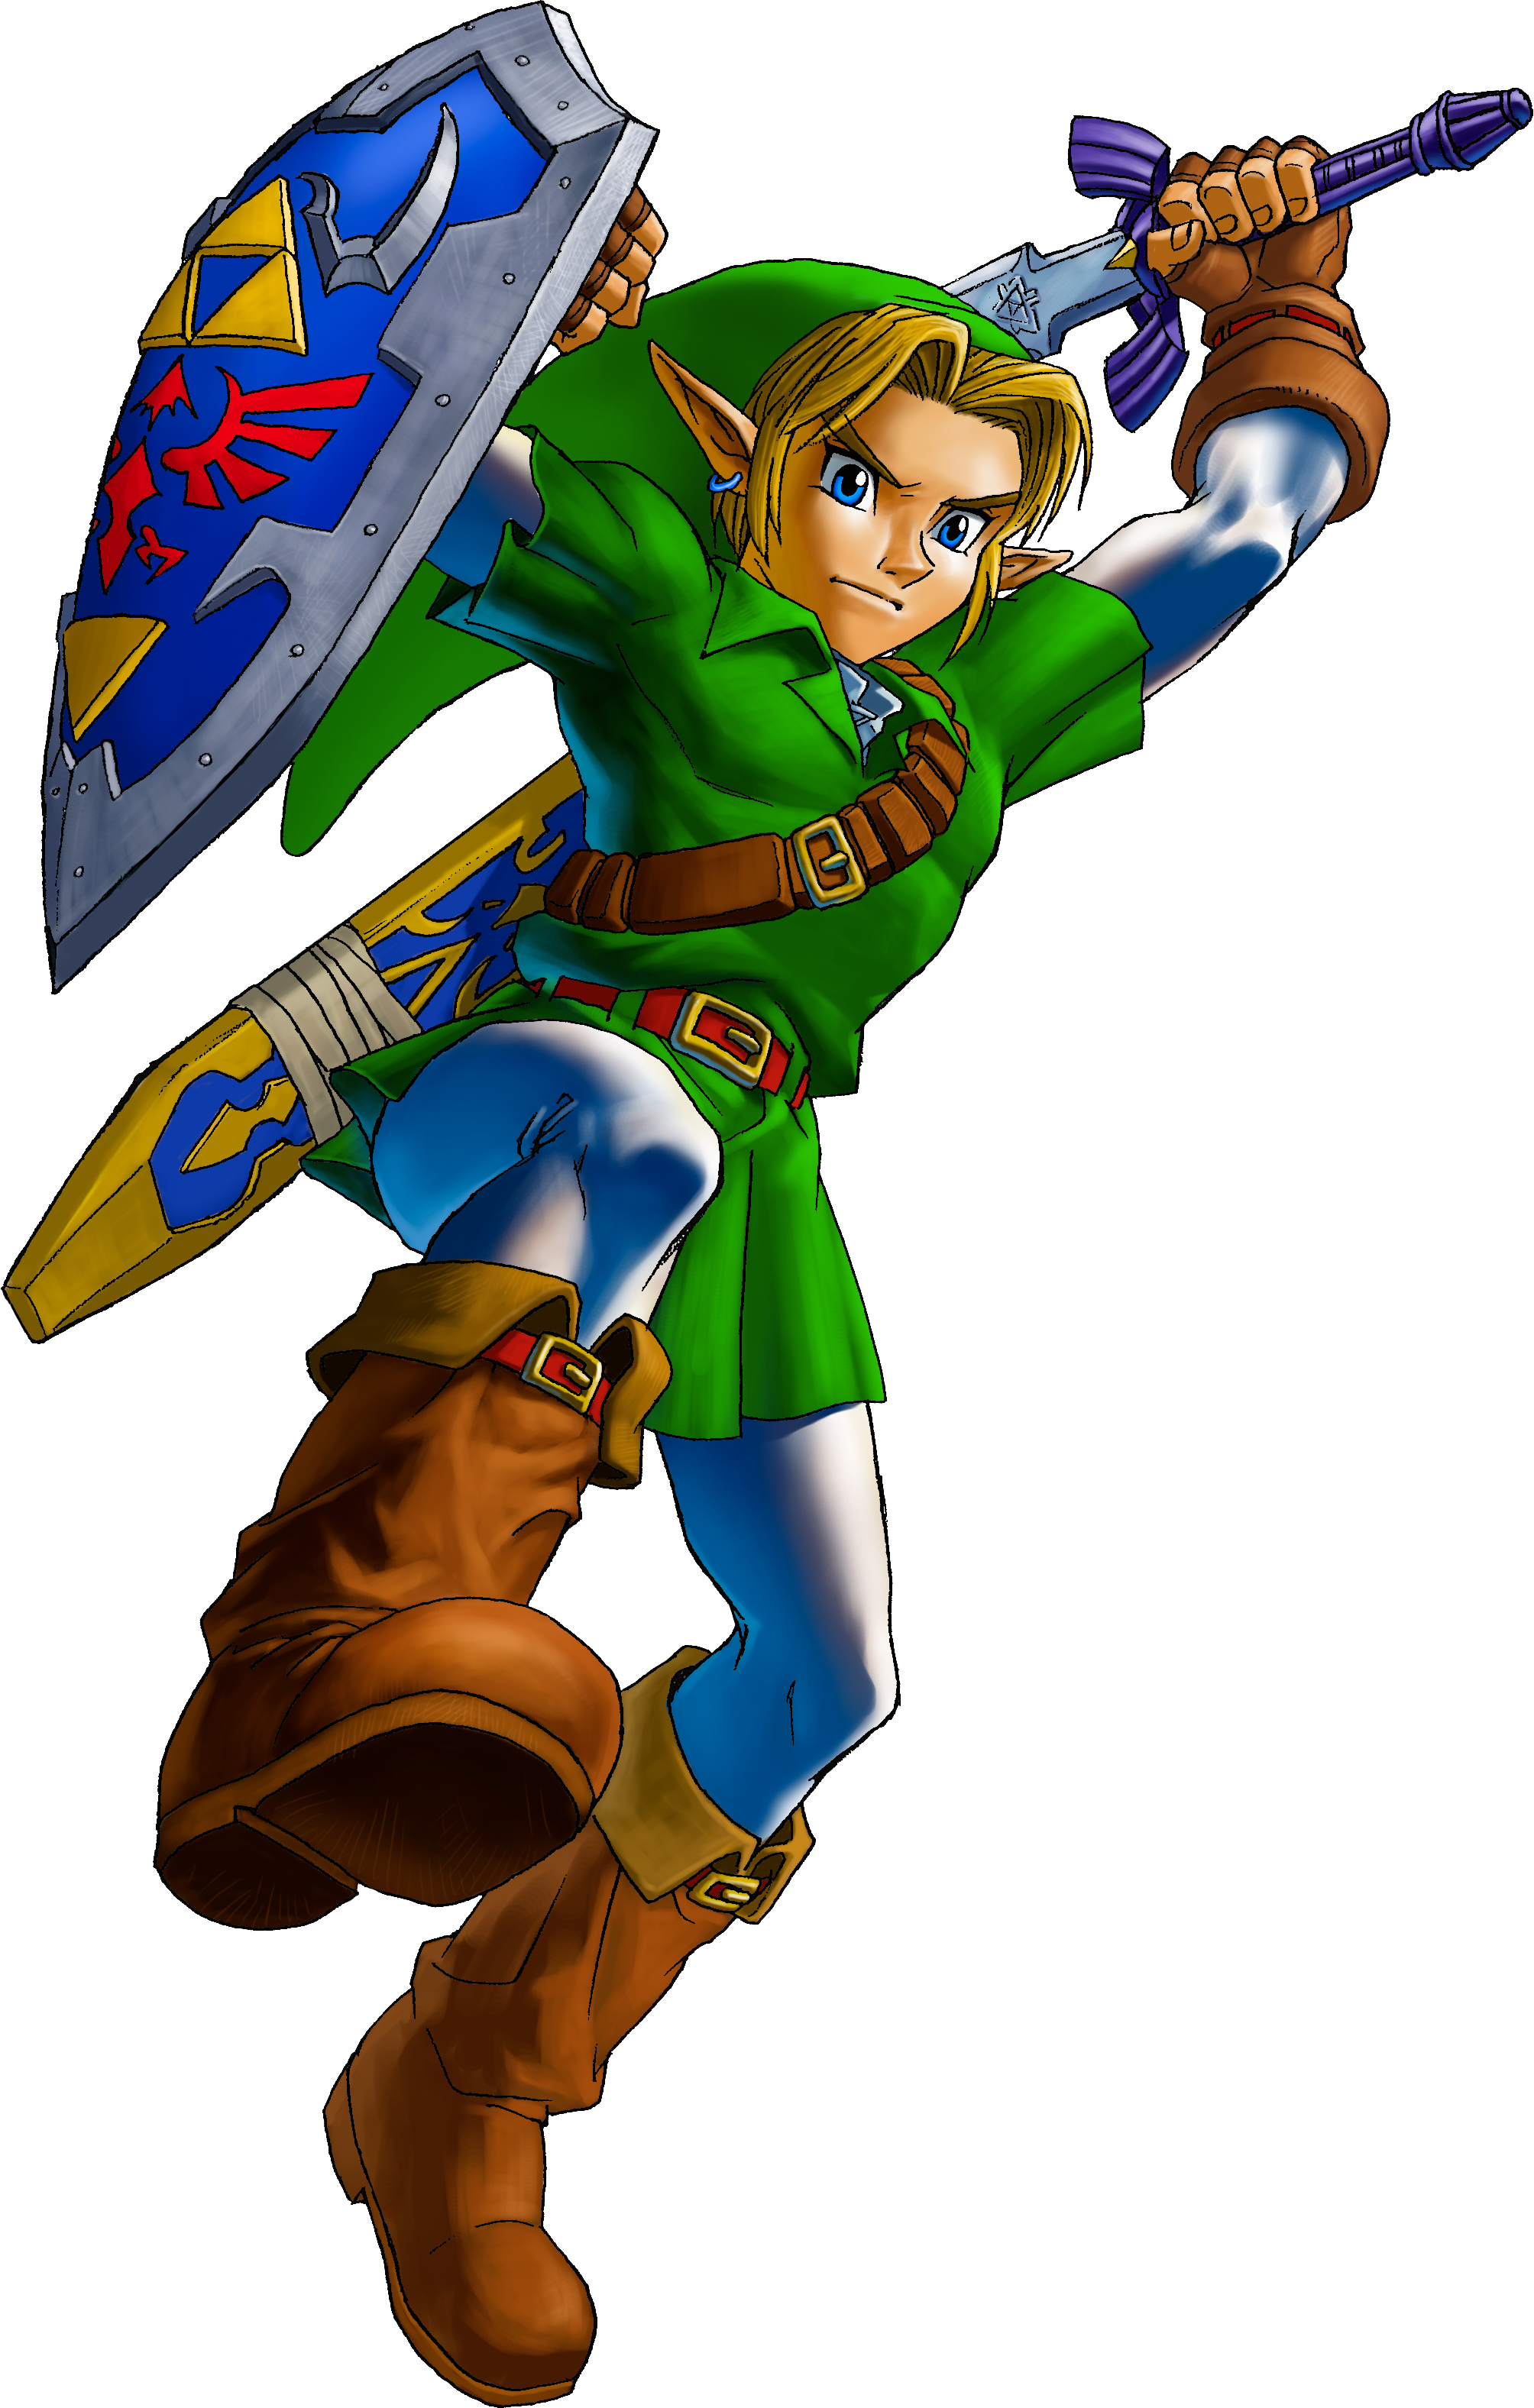 Artwork Of Link Performing A Jump Attack From Ocarina - Ocarina Of Time Lin...